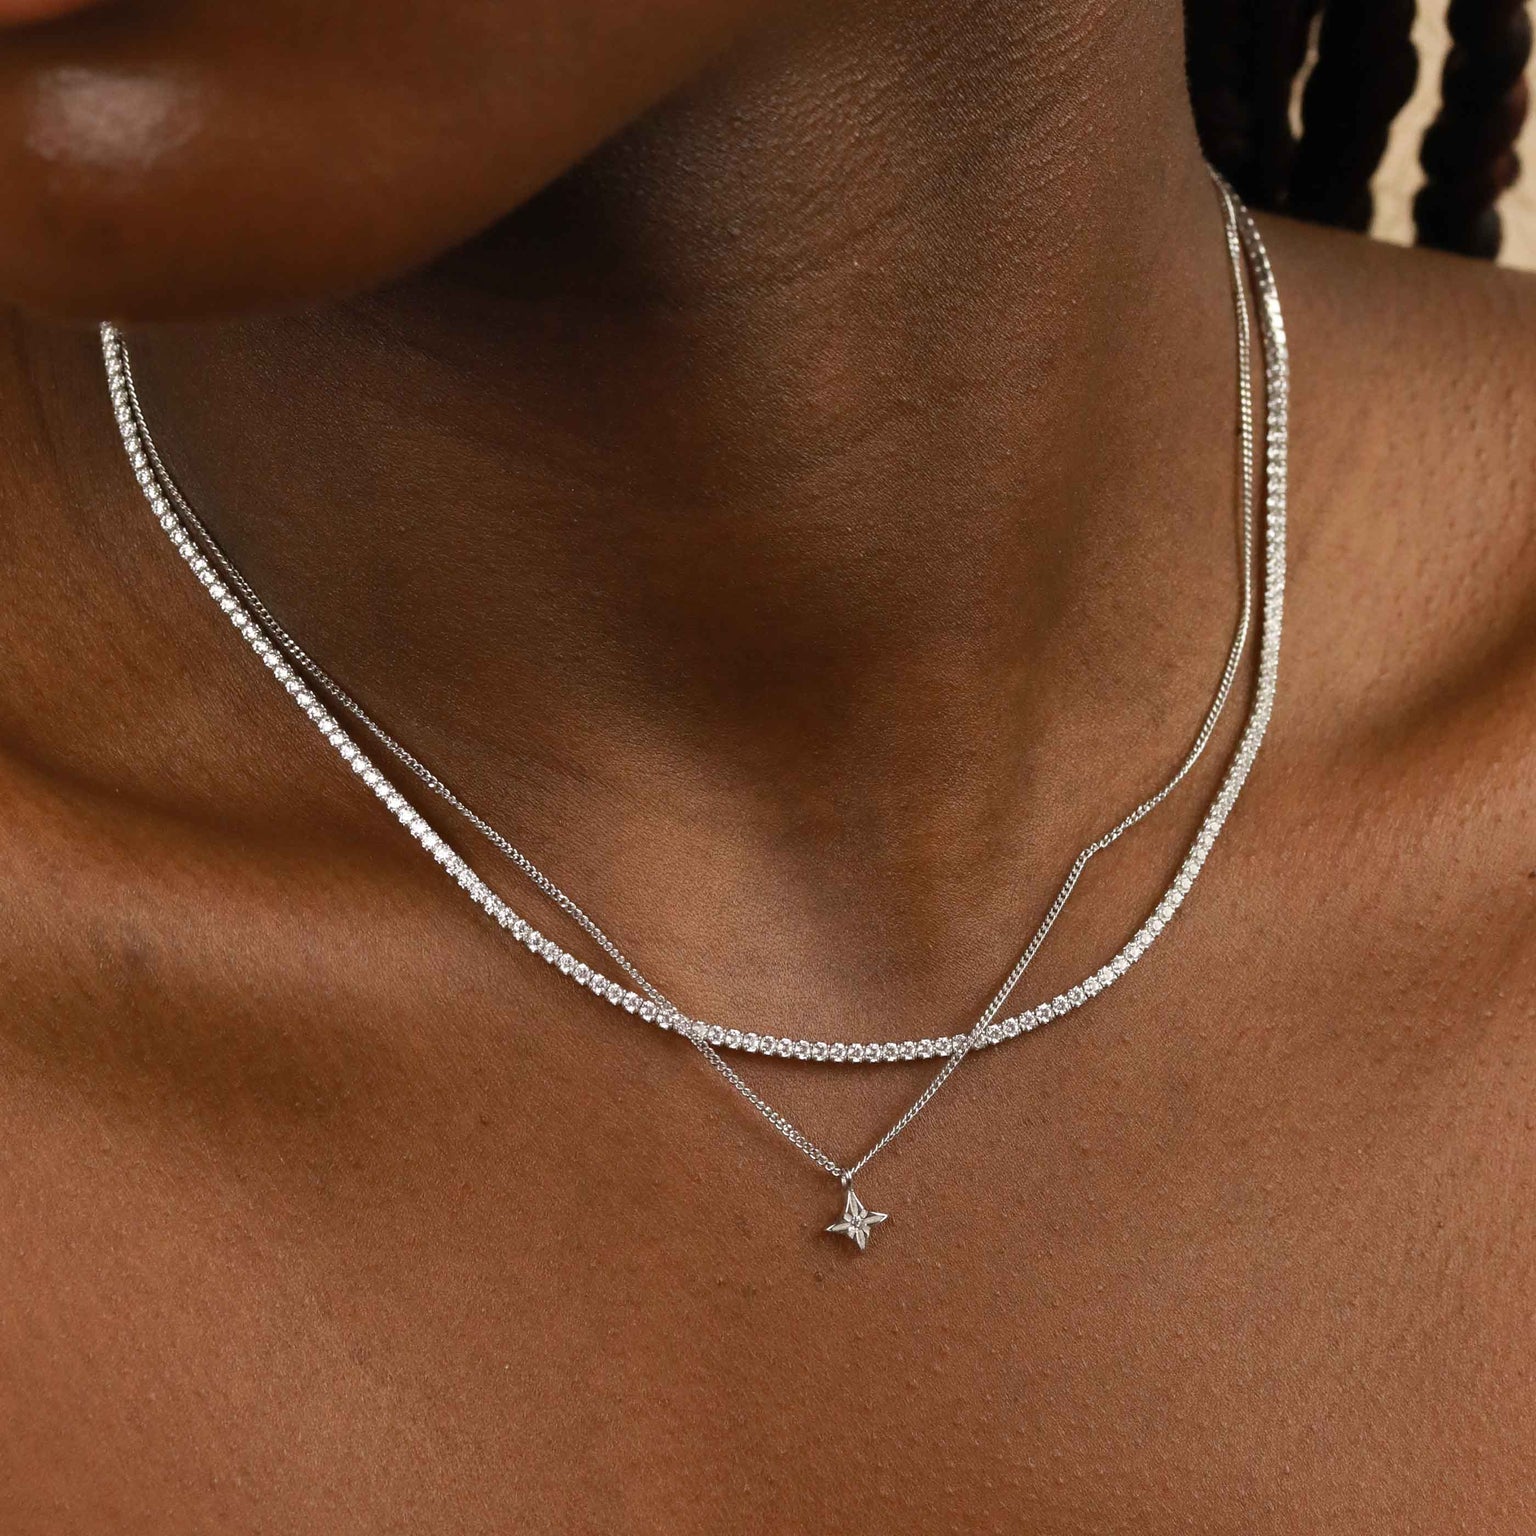 Tennis Chain Necklace in Silver worn with etched star pendant necklace